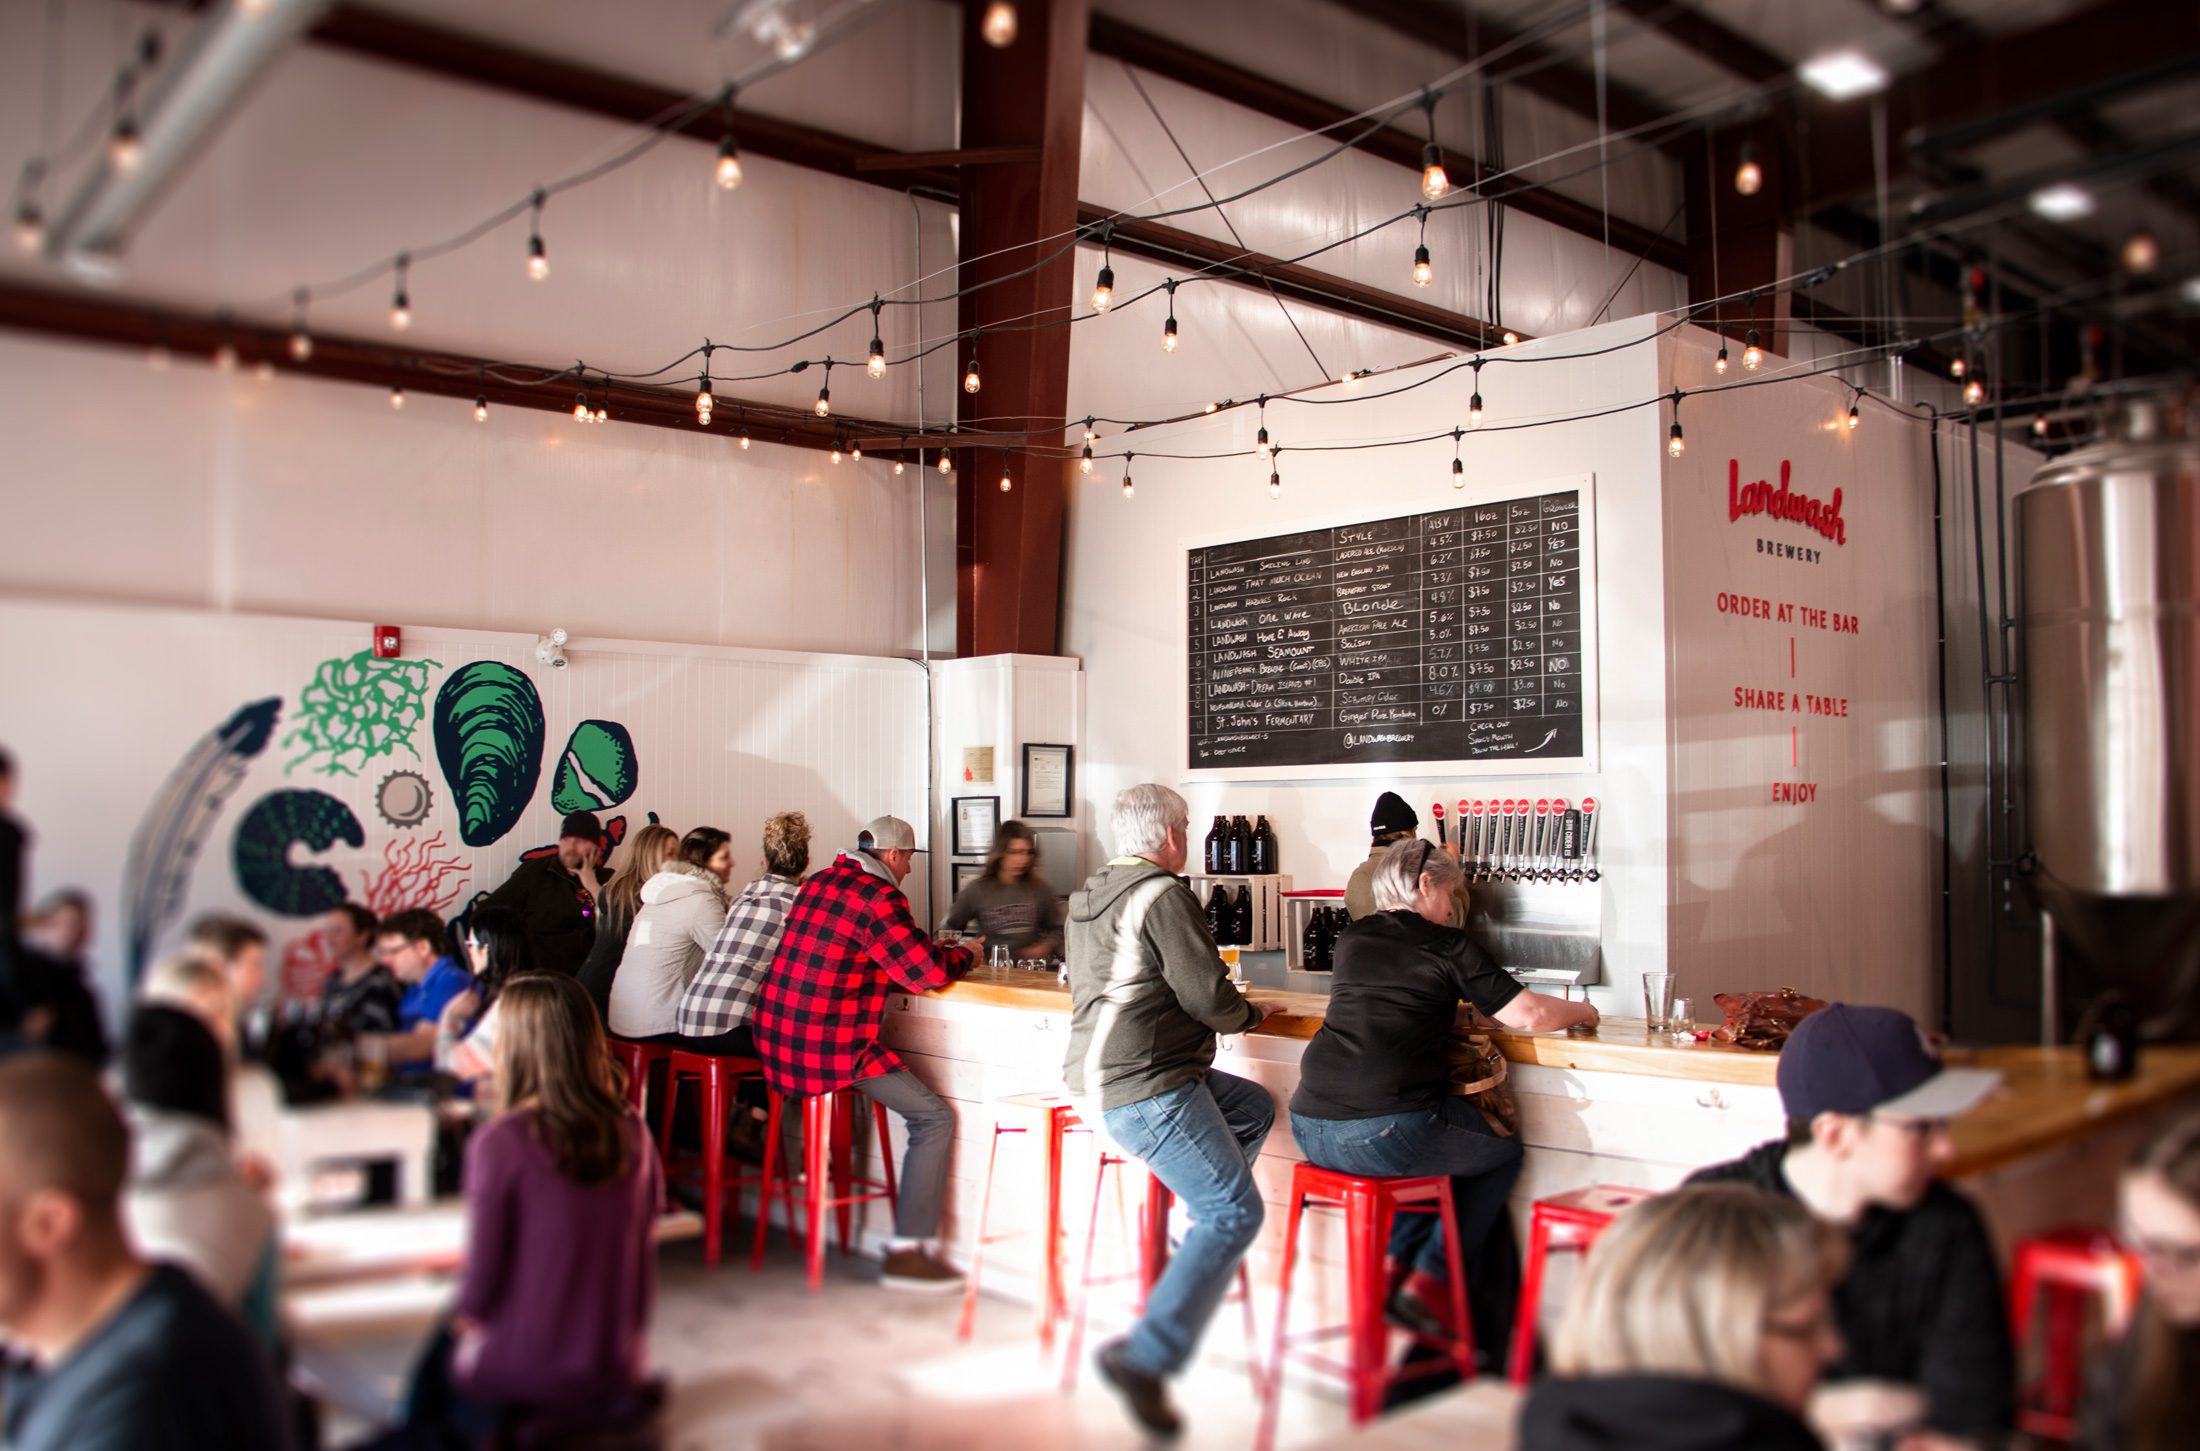 An image of a bustling Landwash taproom with a bar area and large chalkboard